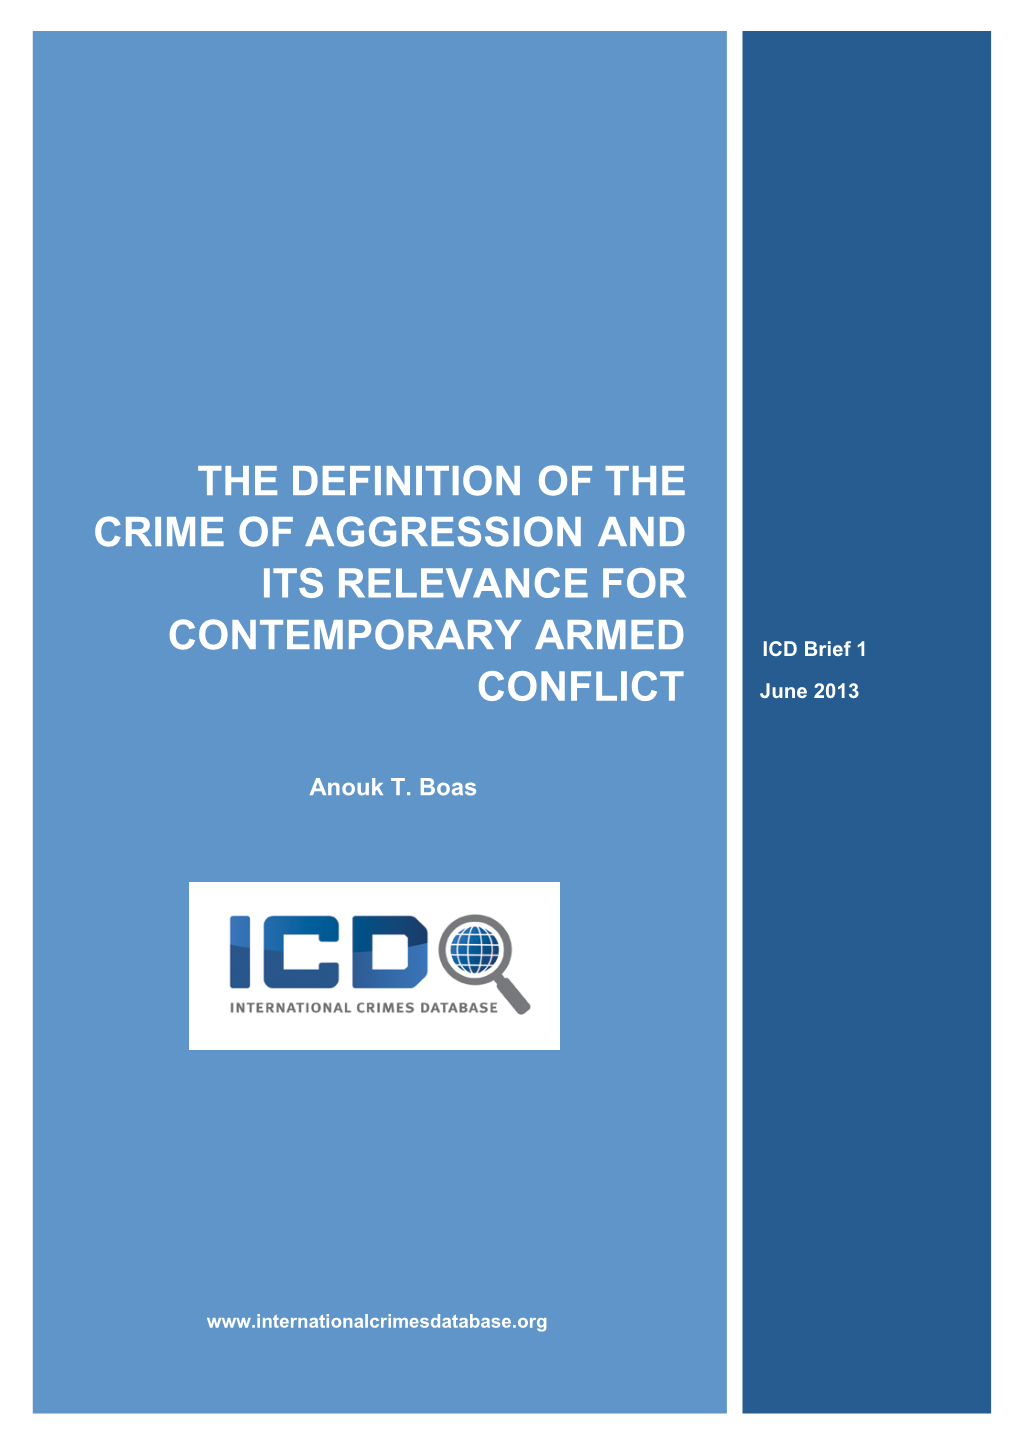 The Definition of the Crime of Aggression and Its Relevance for Contemporary Armed Conflict